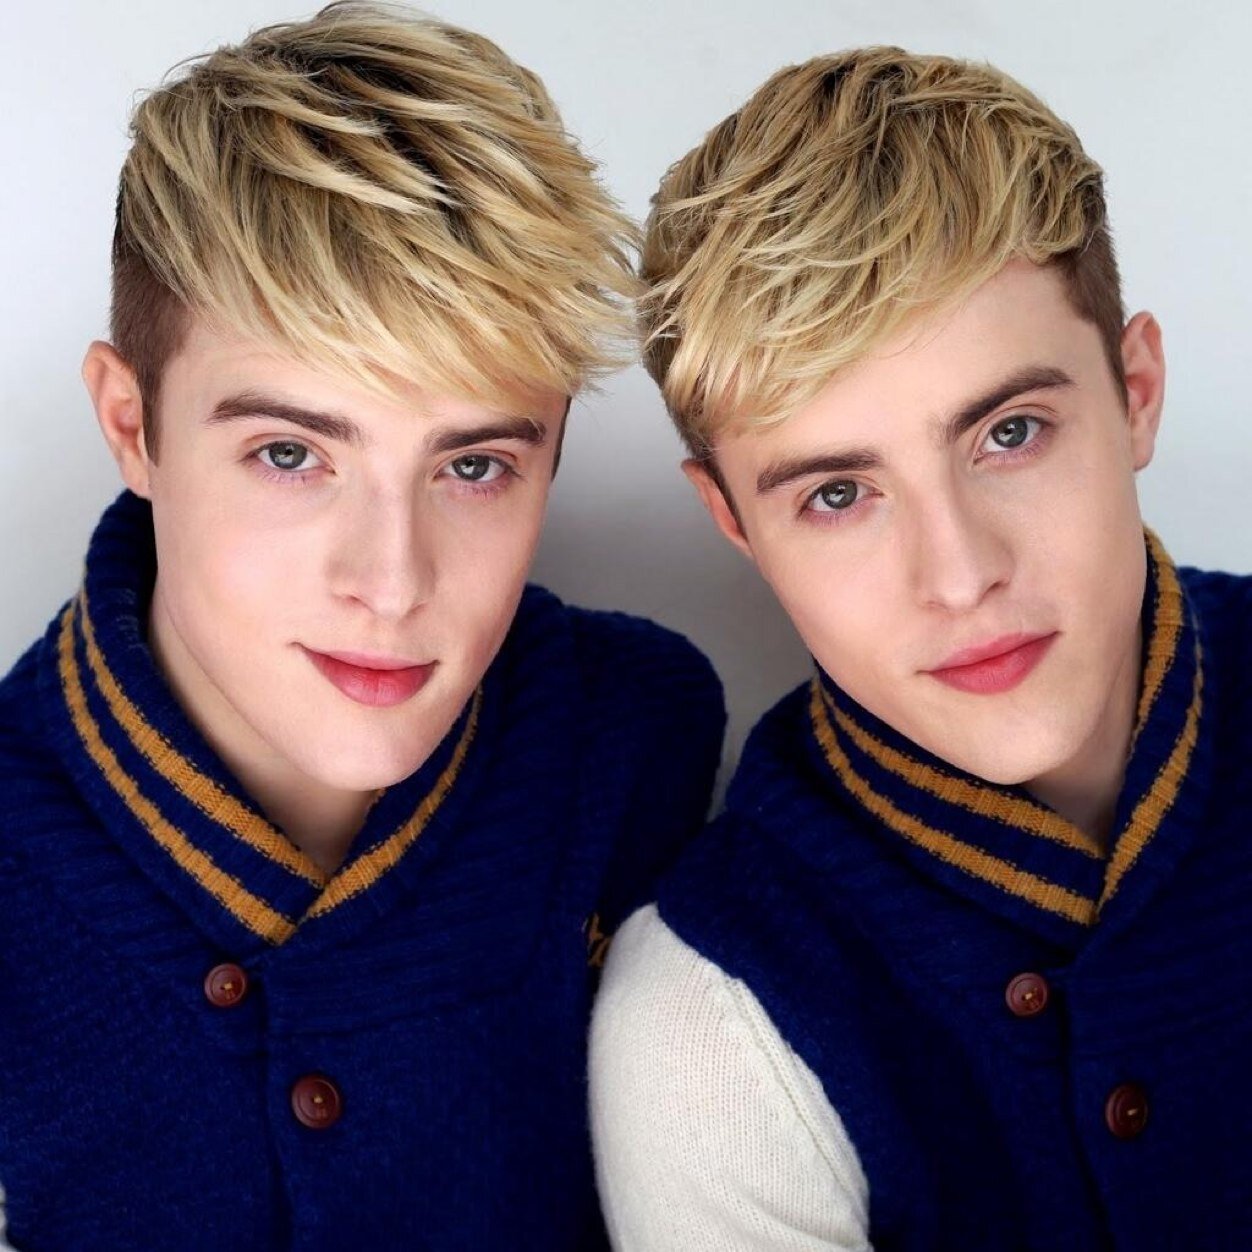 Jedward Pics, Music Collection